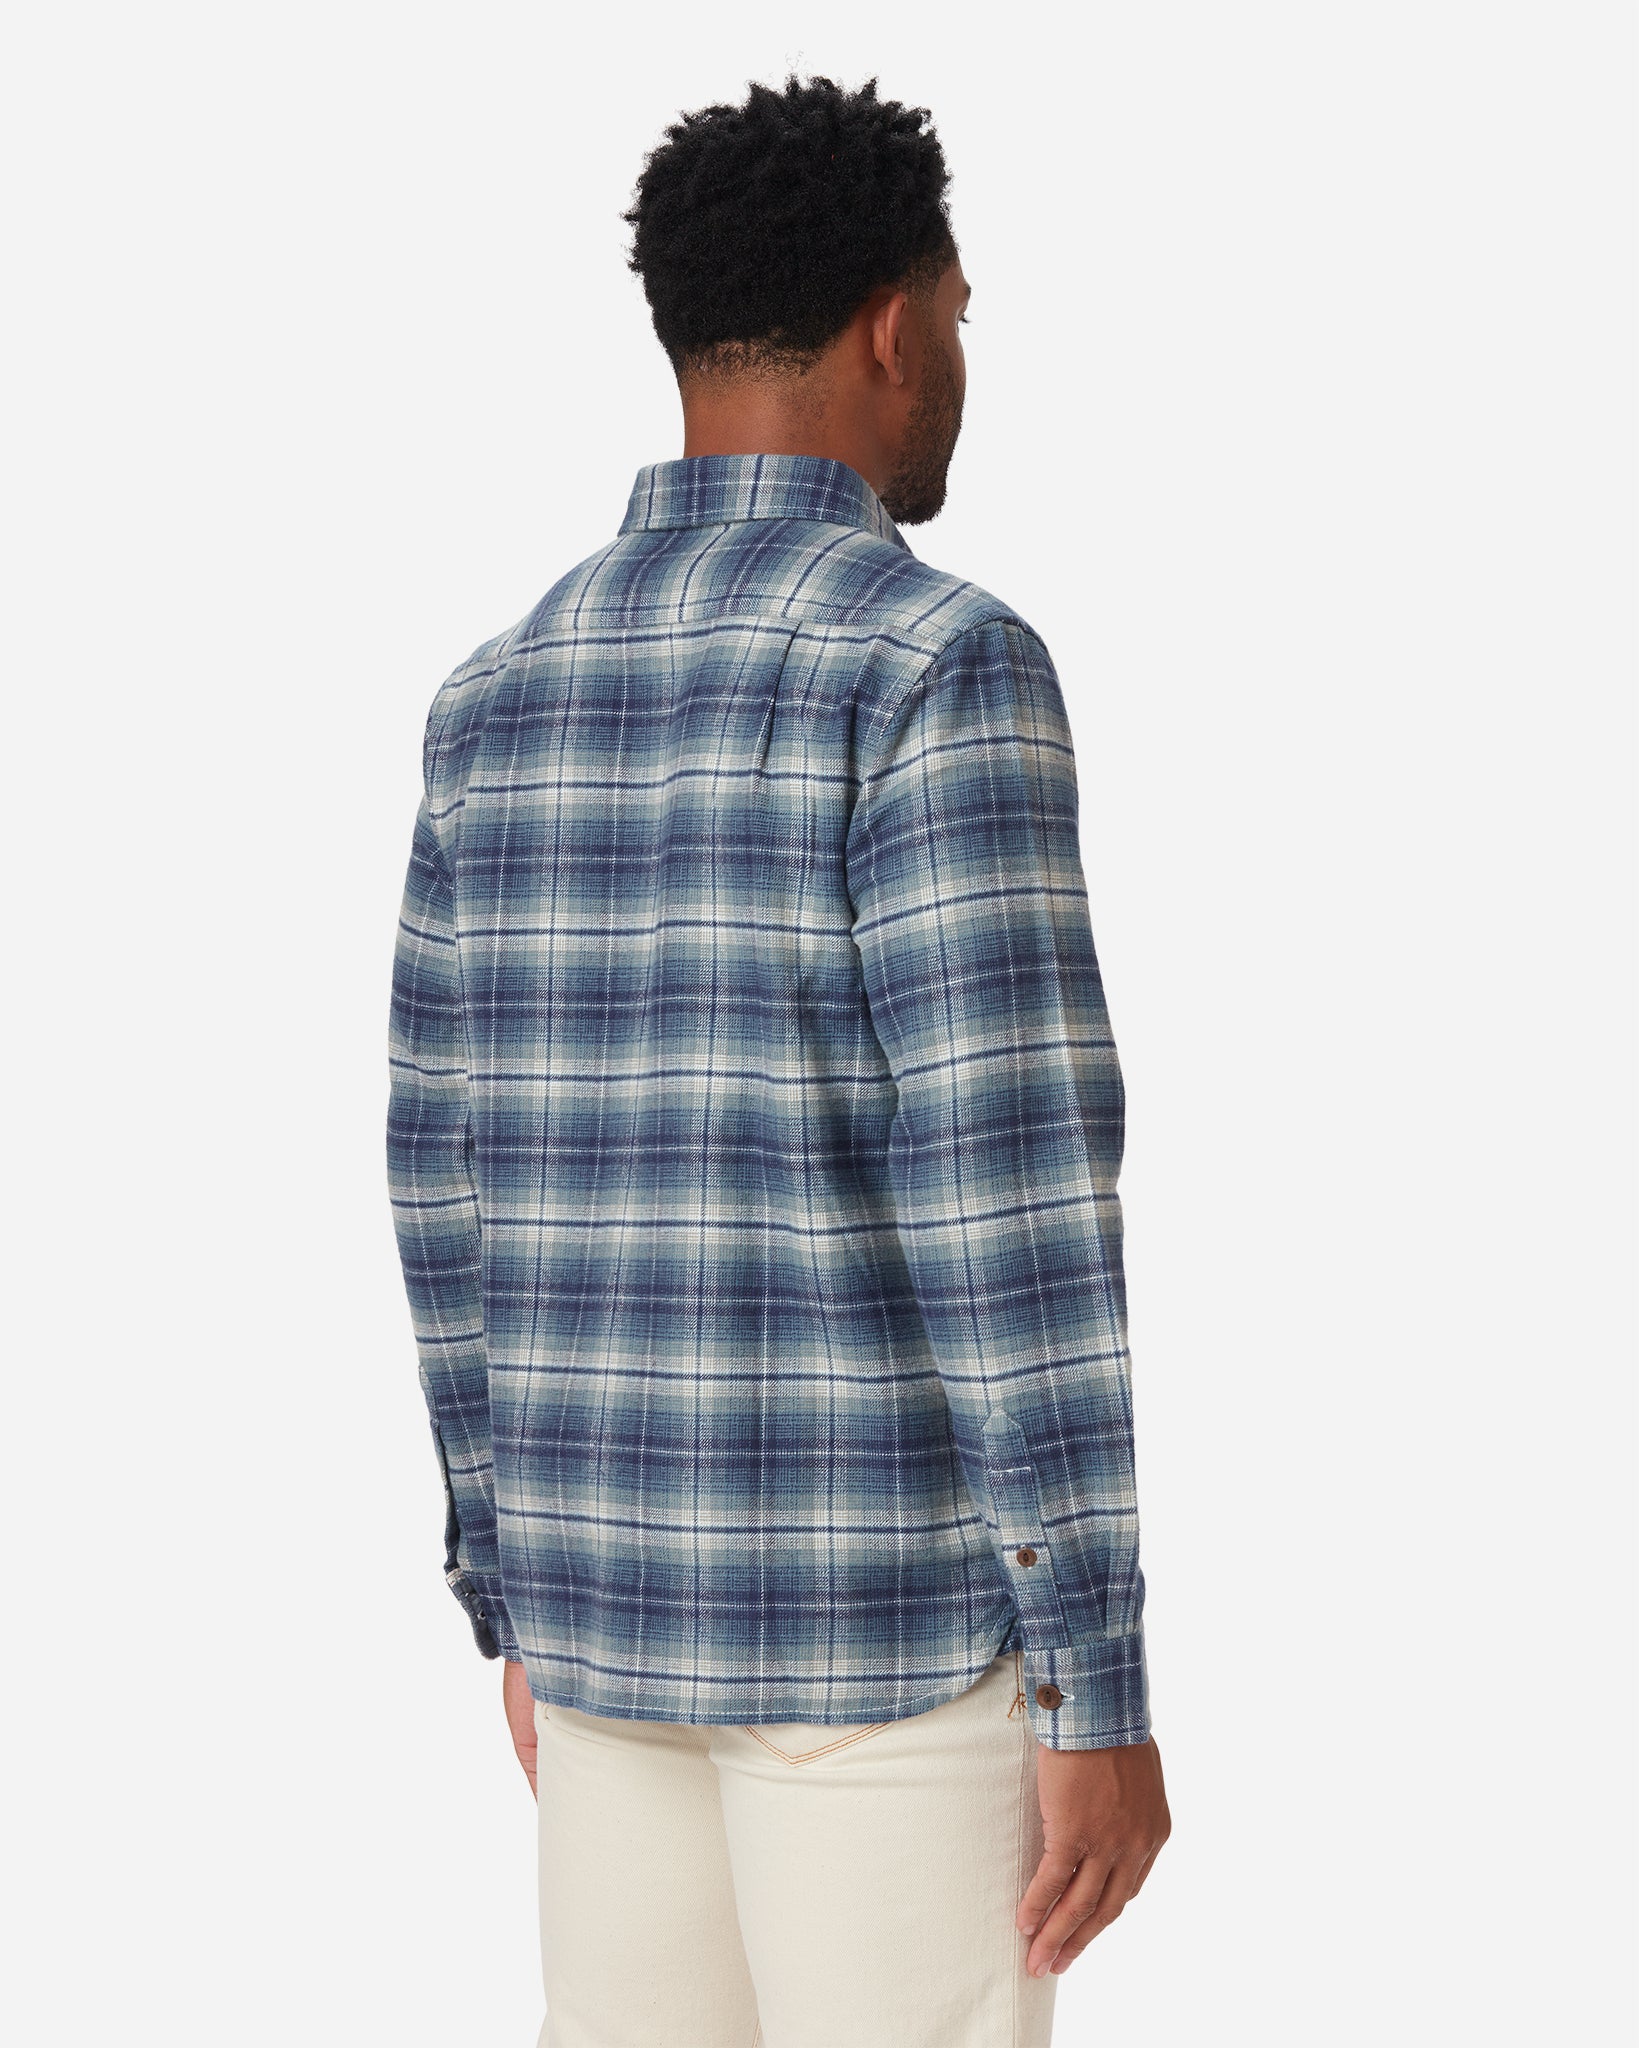 back of model with rightward gaze wearing men's off white and light blue plaid pattern flannel with brown buttons 